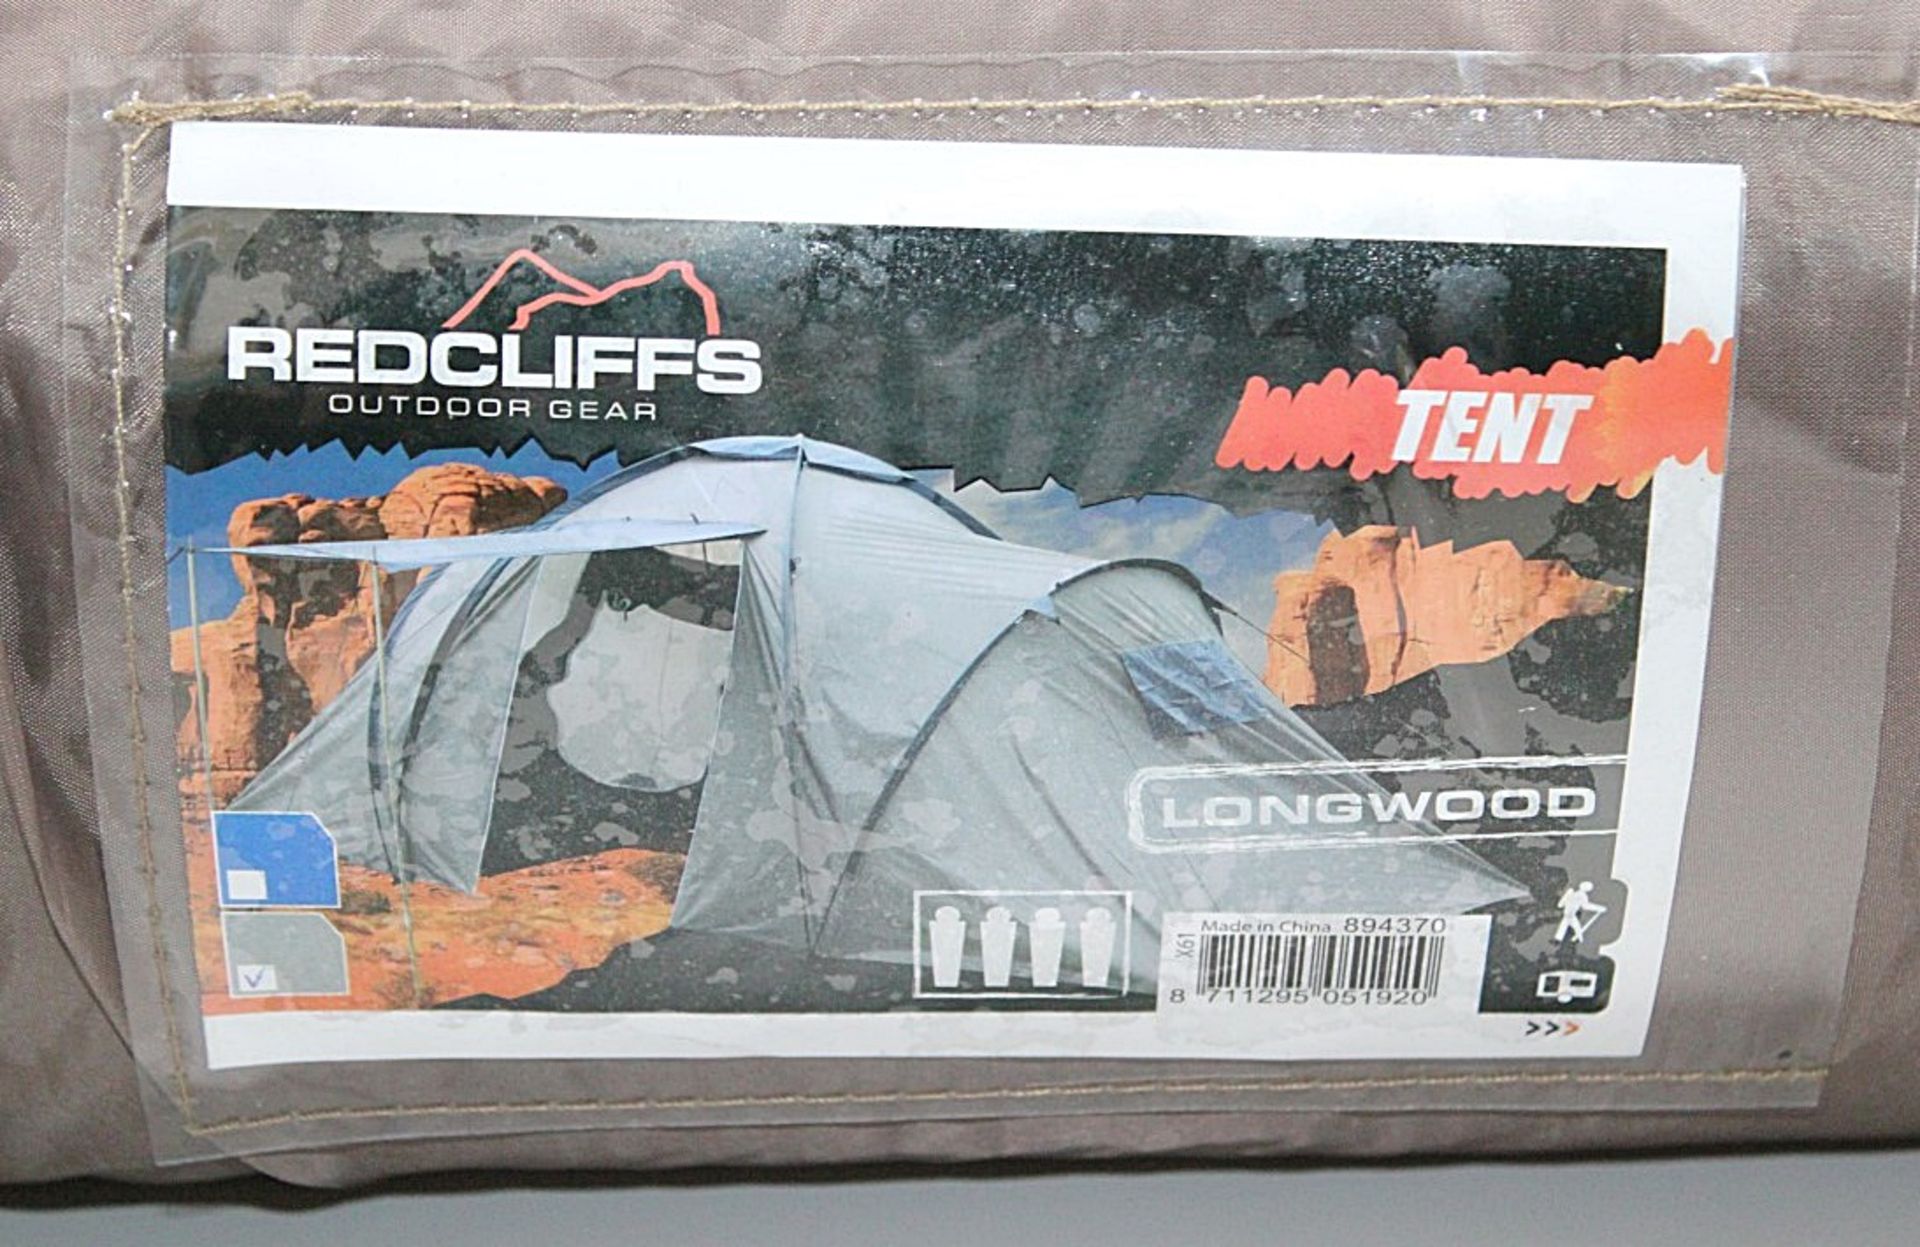 1 x Redcliffs Longwood Large 4-Man Family Tent - Colour: Brown - 2 Room / 2 Entrances -  Brand New - Image 3 of 6